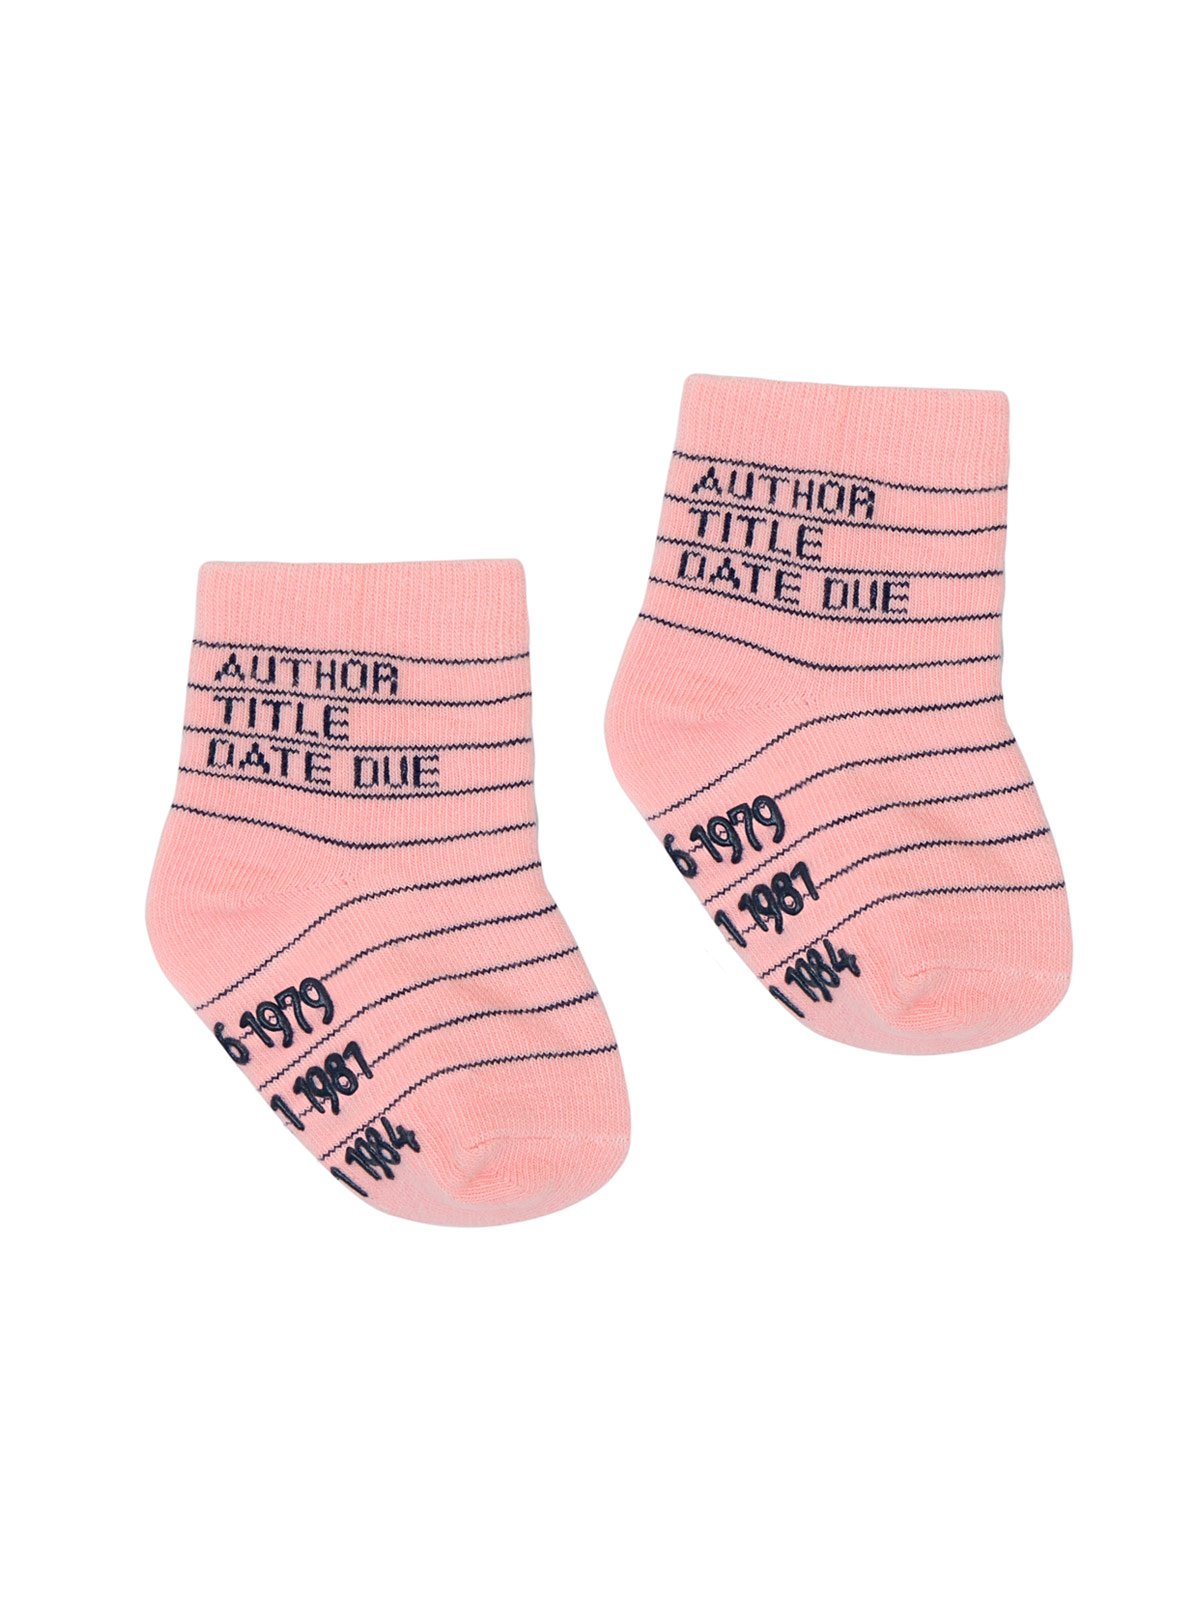 These kid's cotton crew socks in pink by the brand Out of Print feature the iconic library card design with the words 